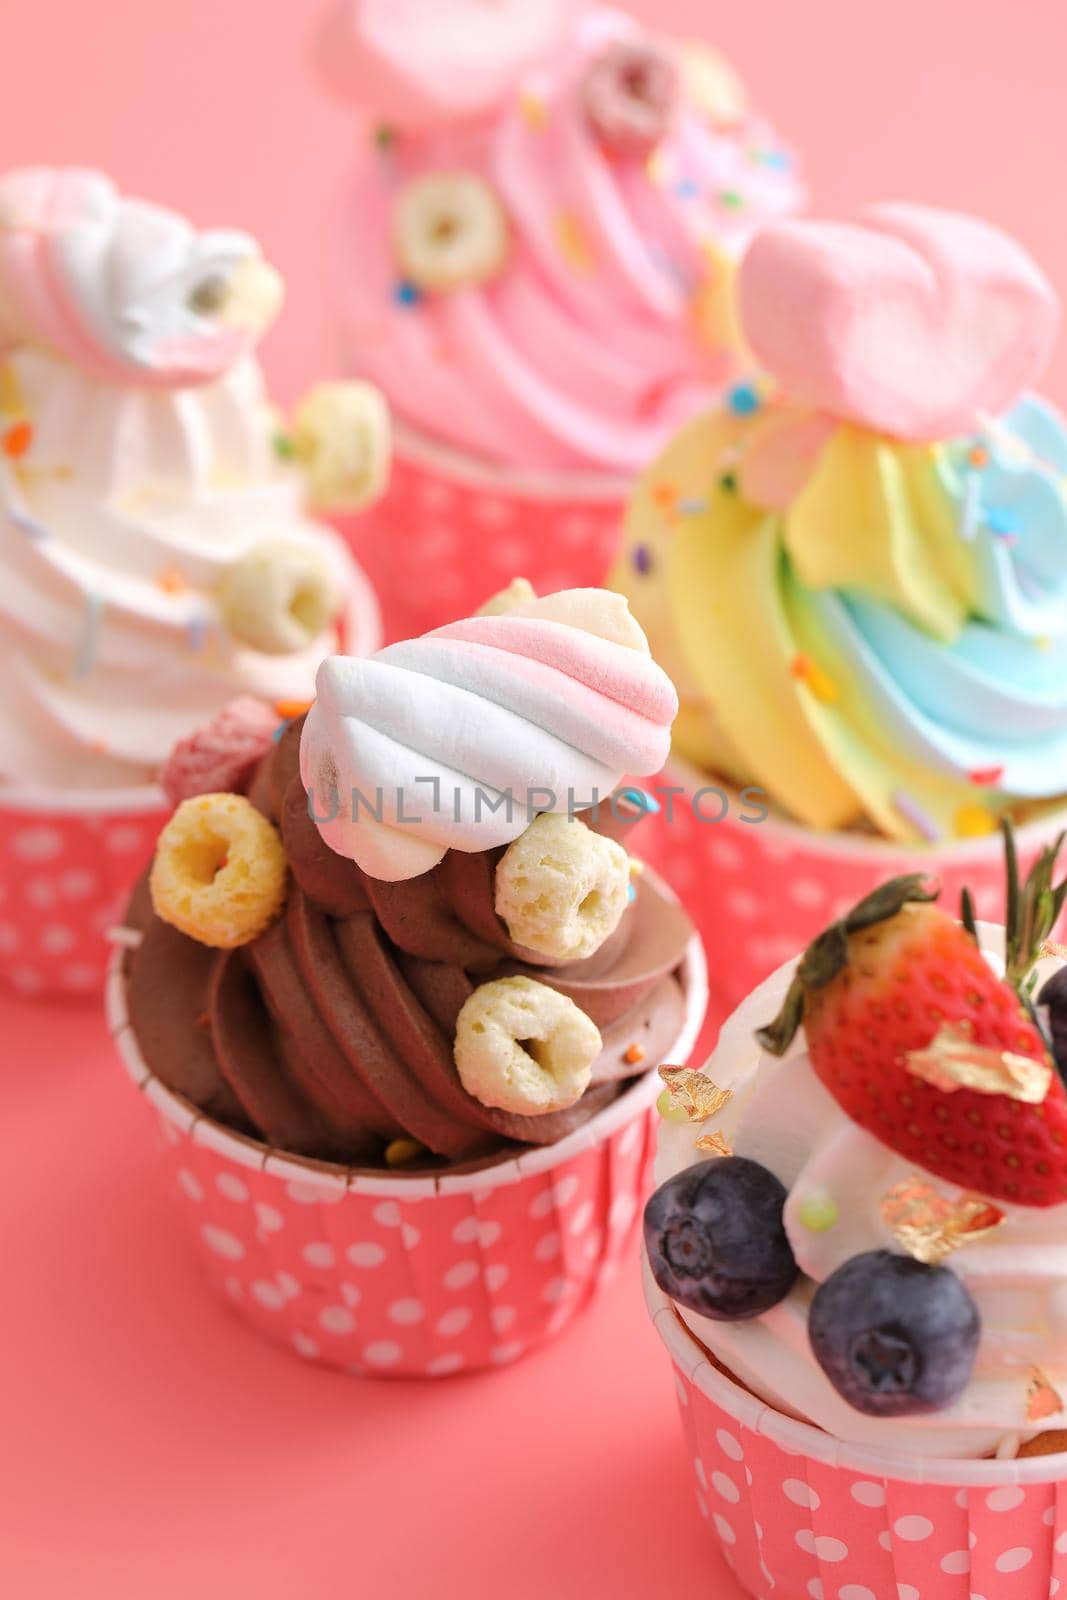 Colorful cupcakes isolated in pink background by piyato